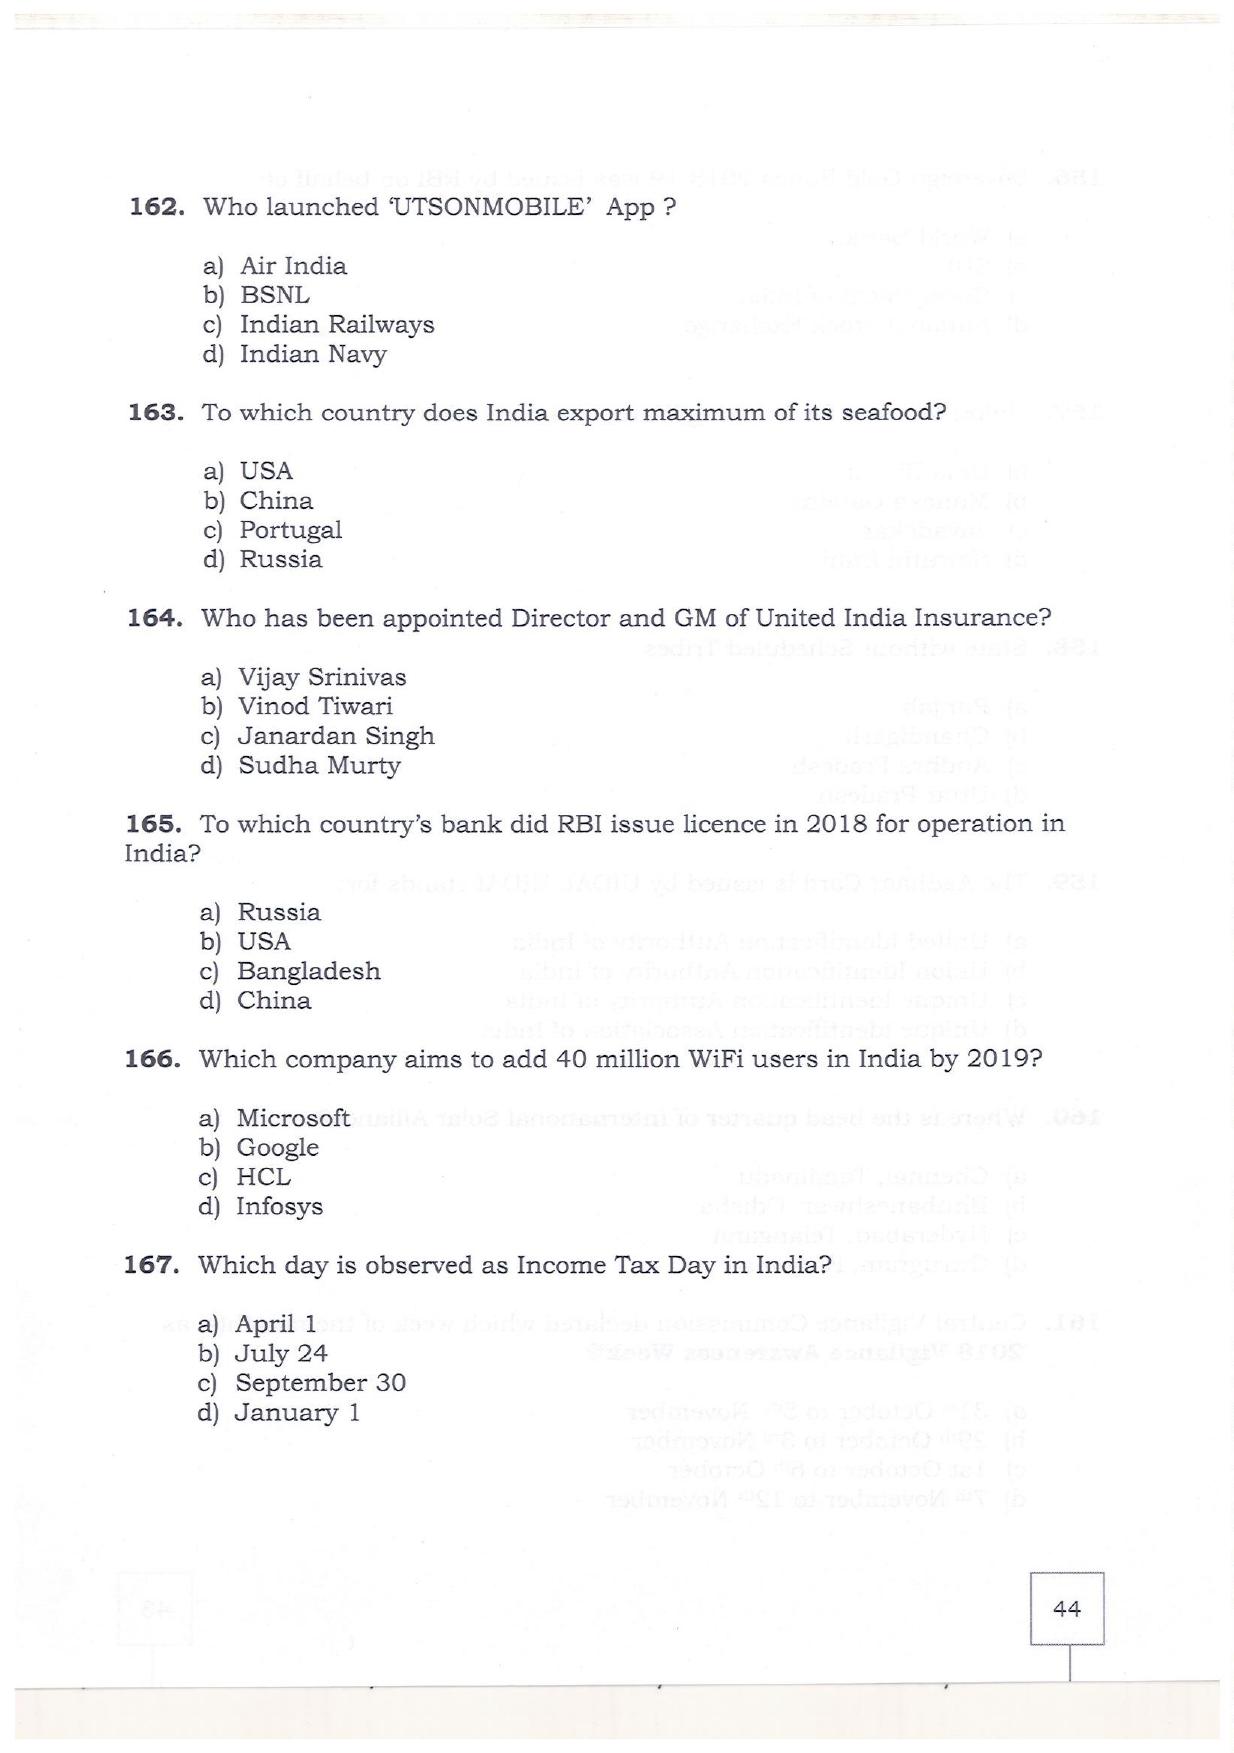 KMAT Question Papers - February 2019 - Page 42